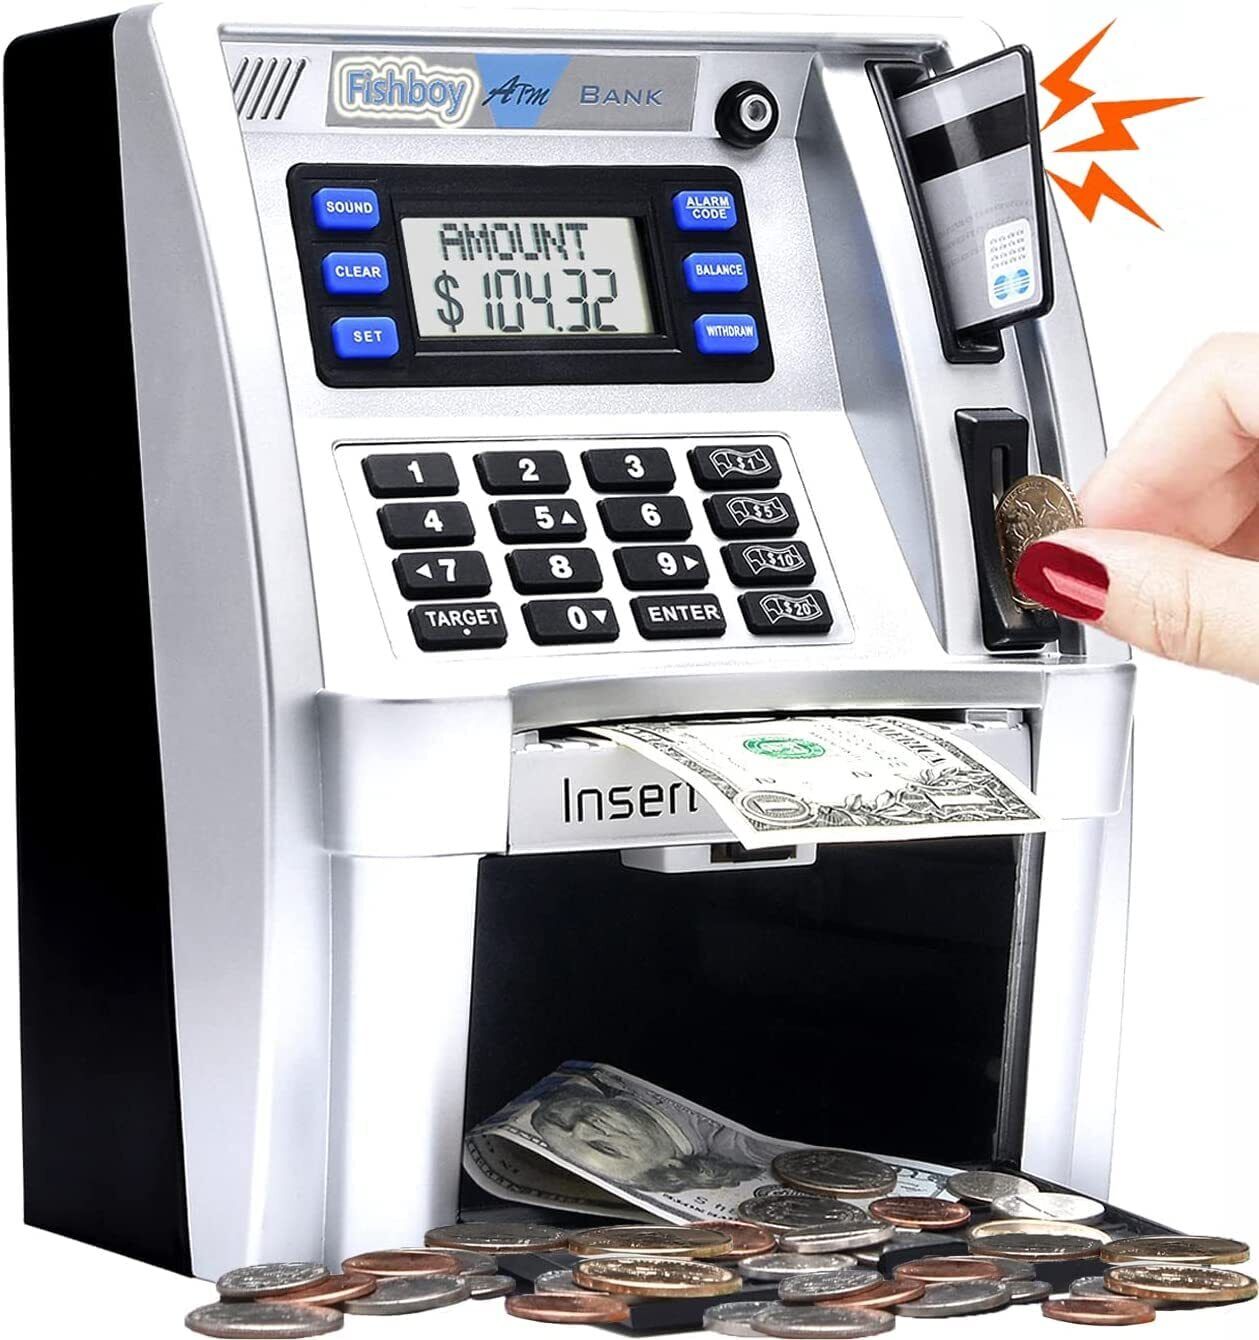 2023 Upgraded ATM Piggy Bank for Real Money for Kids with Debit Card Bill Feeder